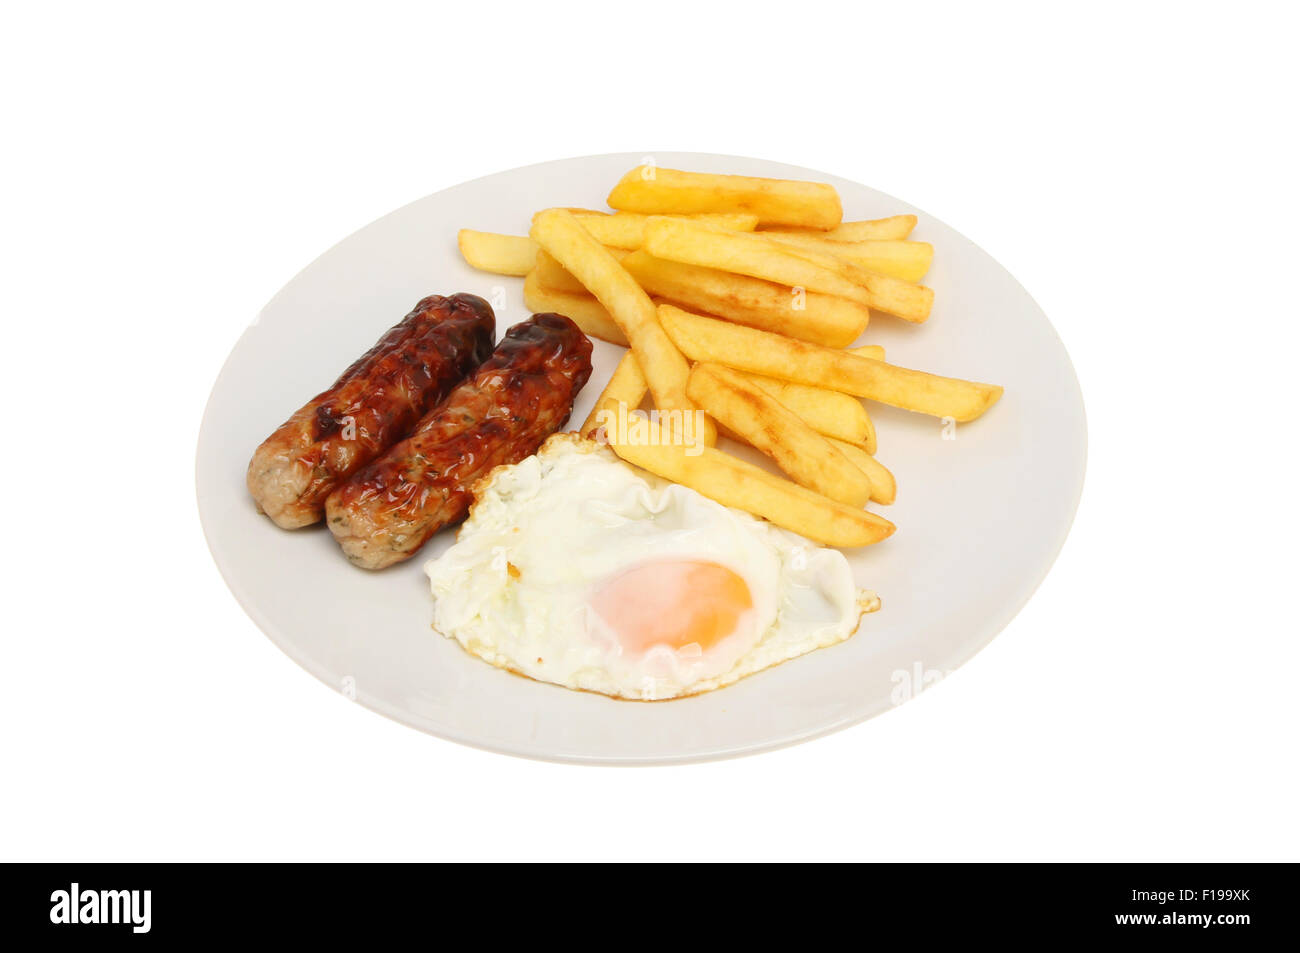 Sausage, fried egg and chips on a plate isolated against white Stock Photo